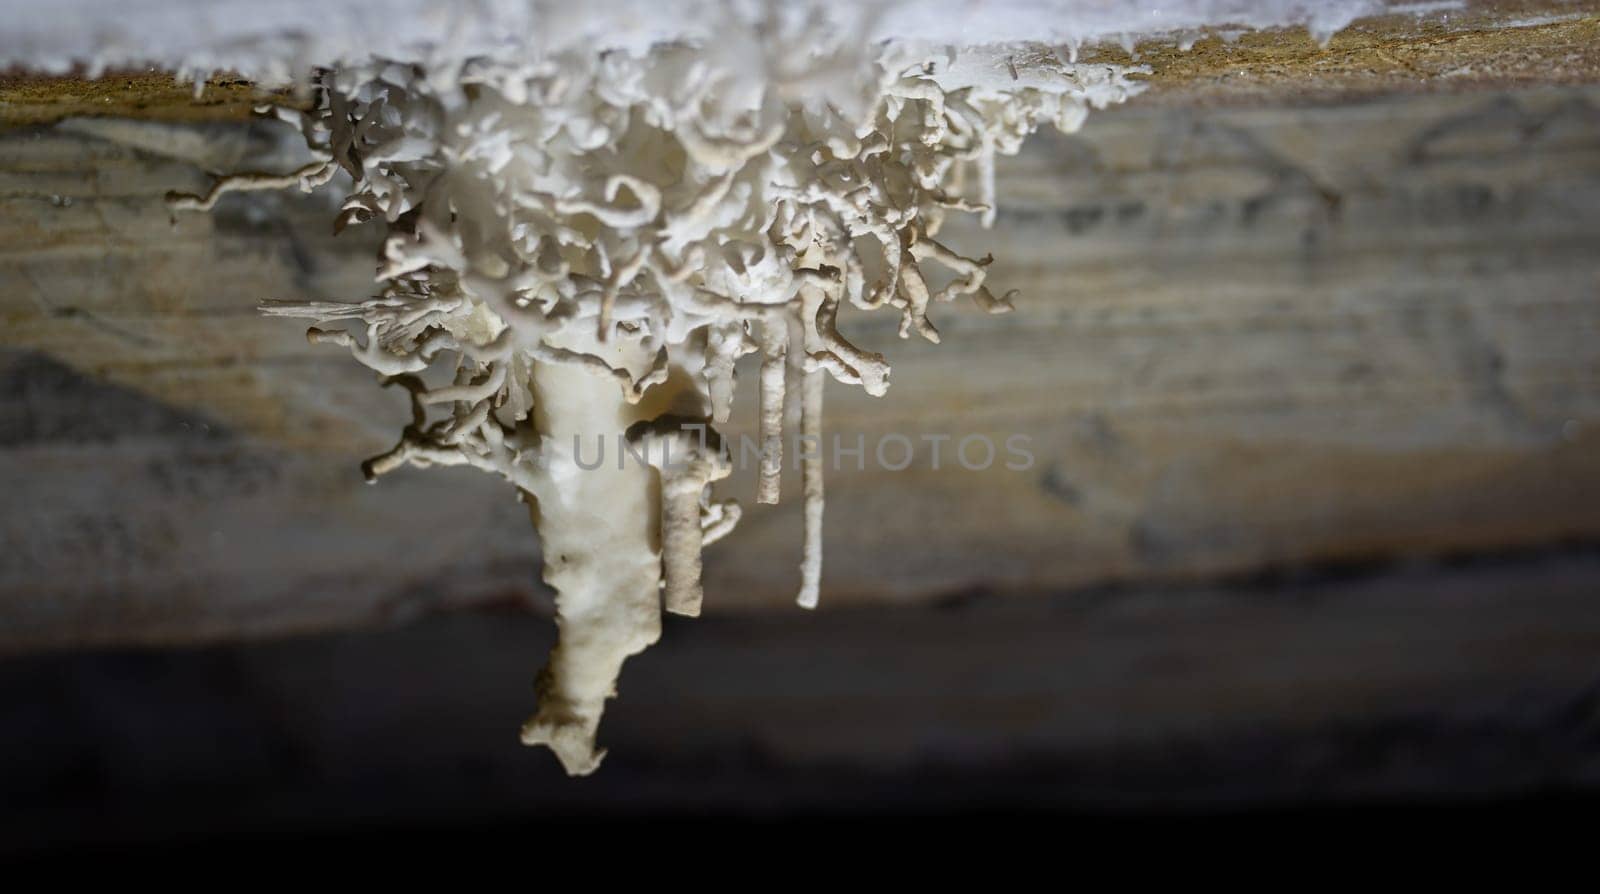 Stunning view of wind-shaped stalactites from a cave ceiling, illuminated by soft light with room for text.